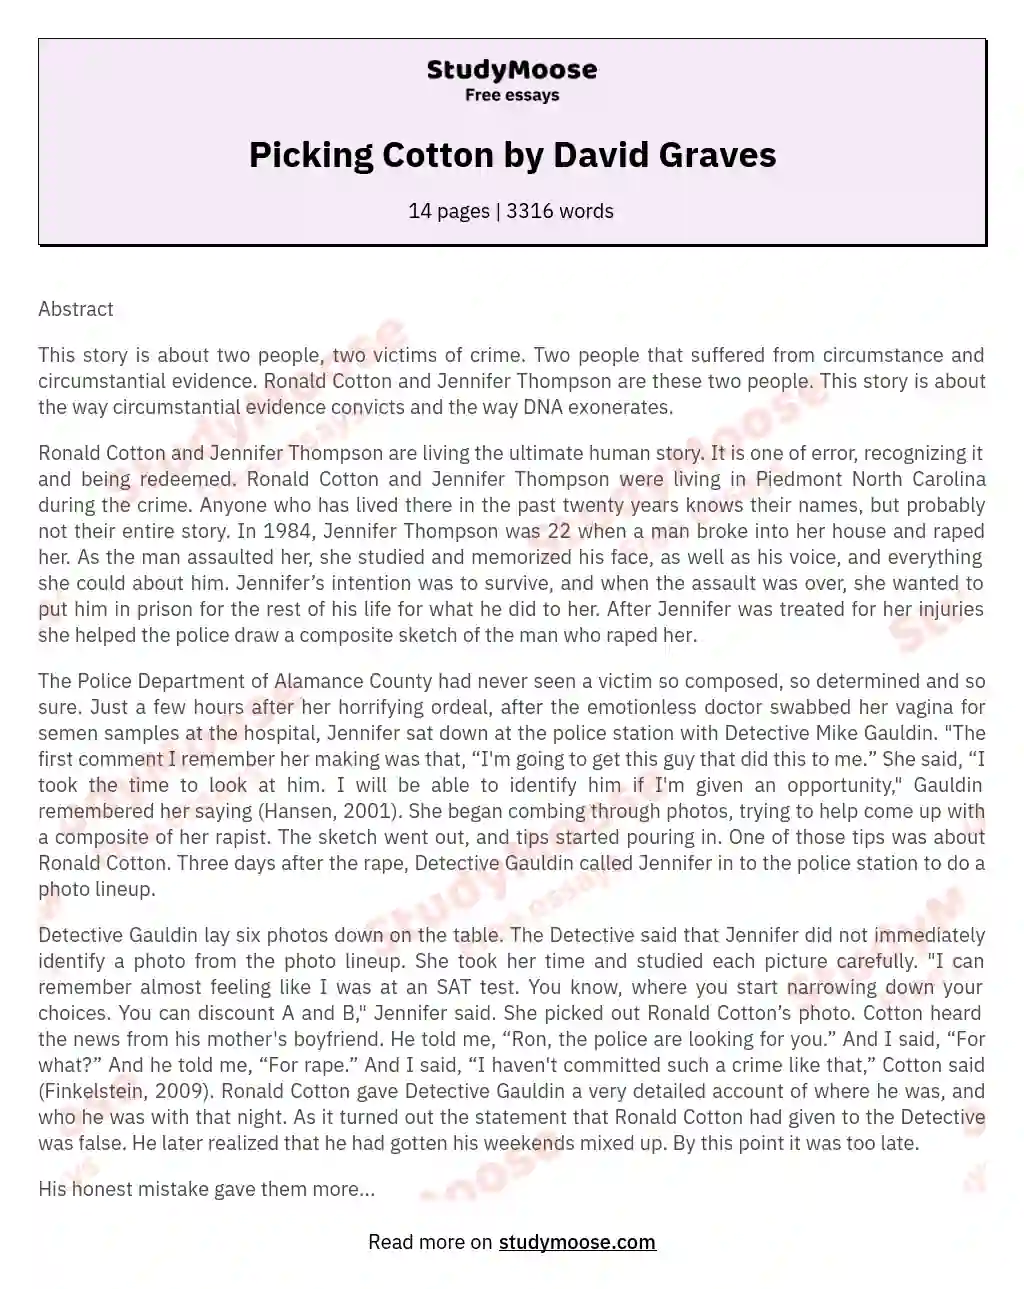 Picking Cotton by David Graves essay